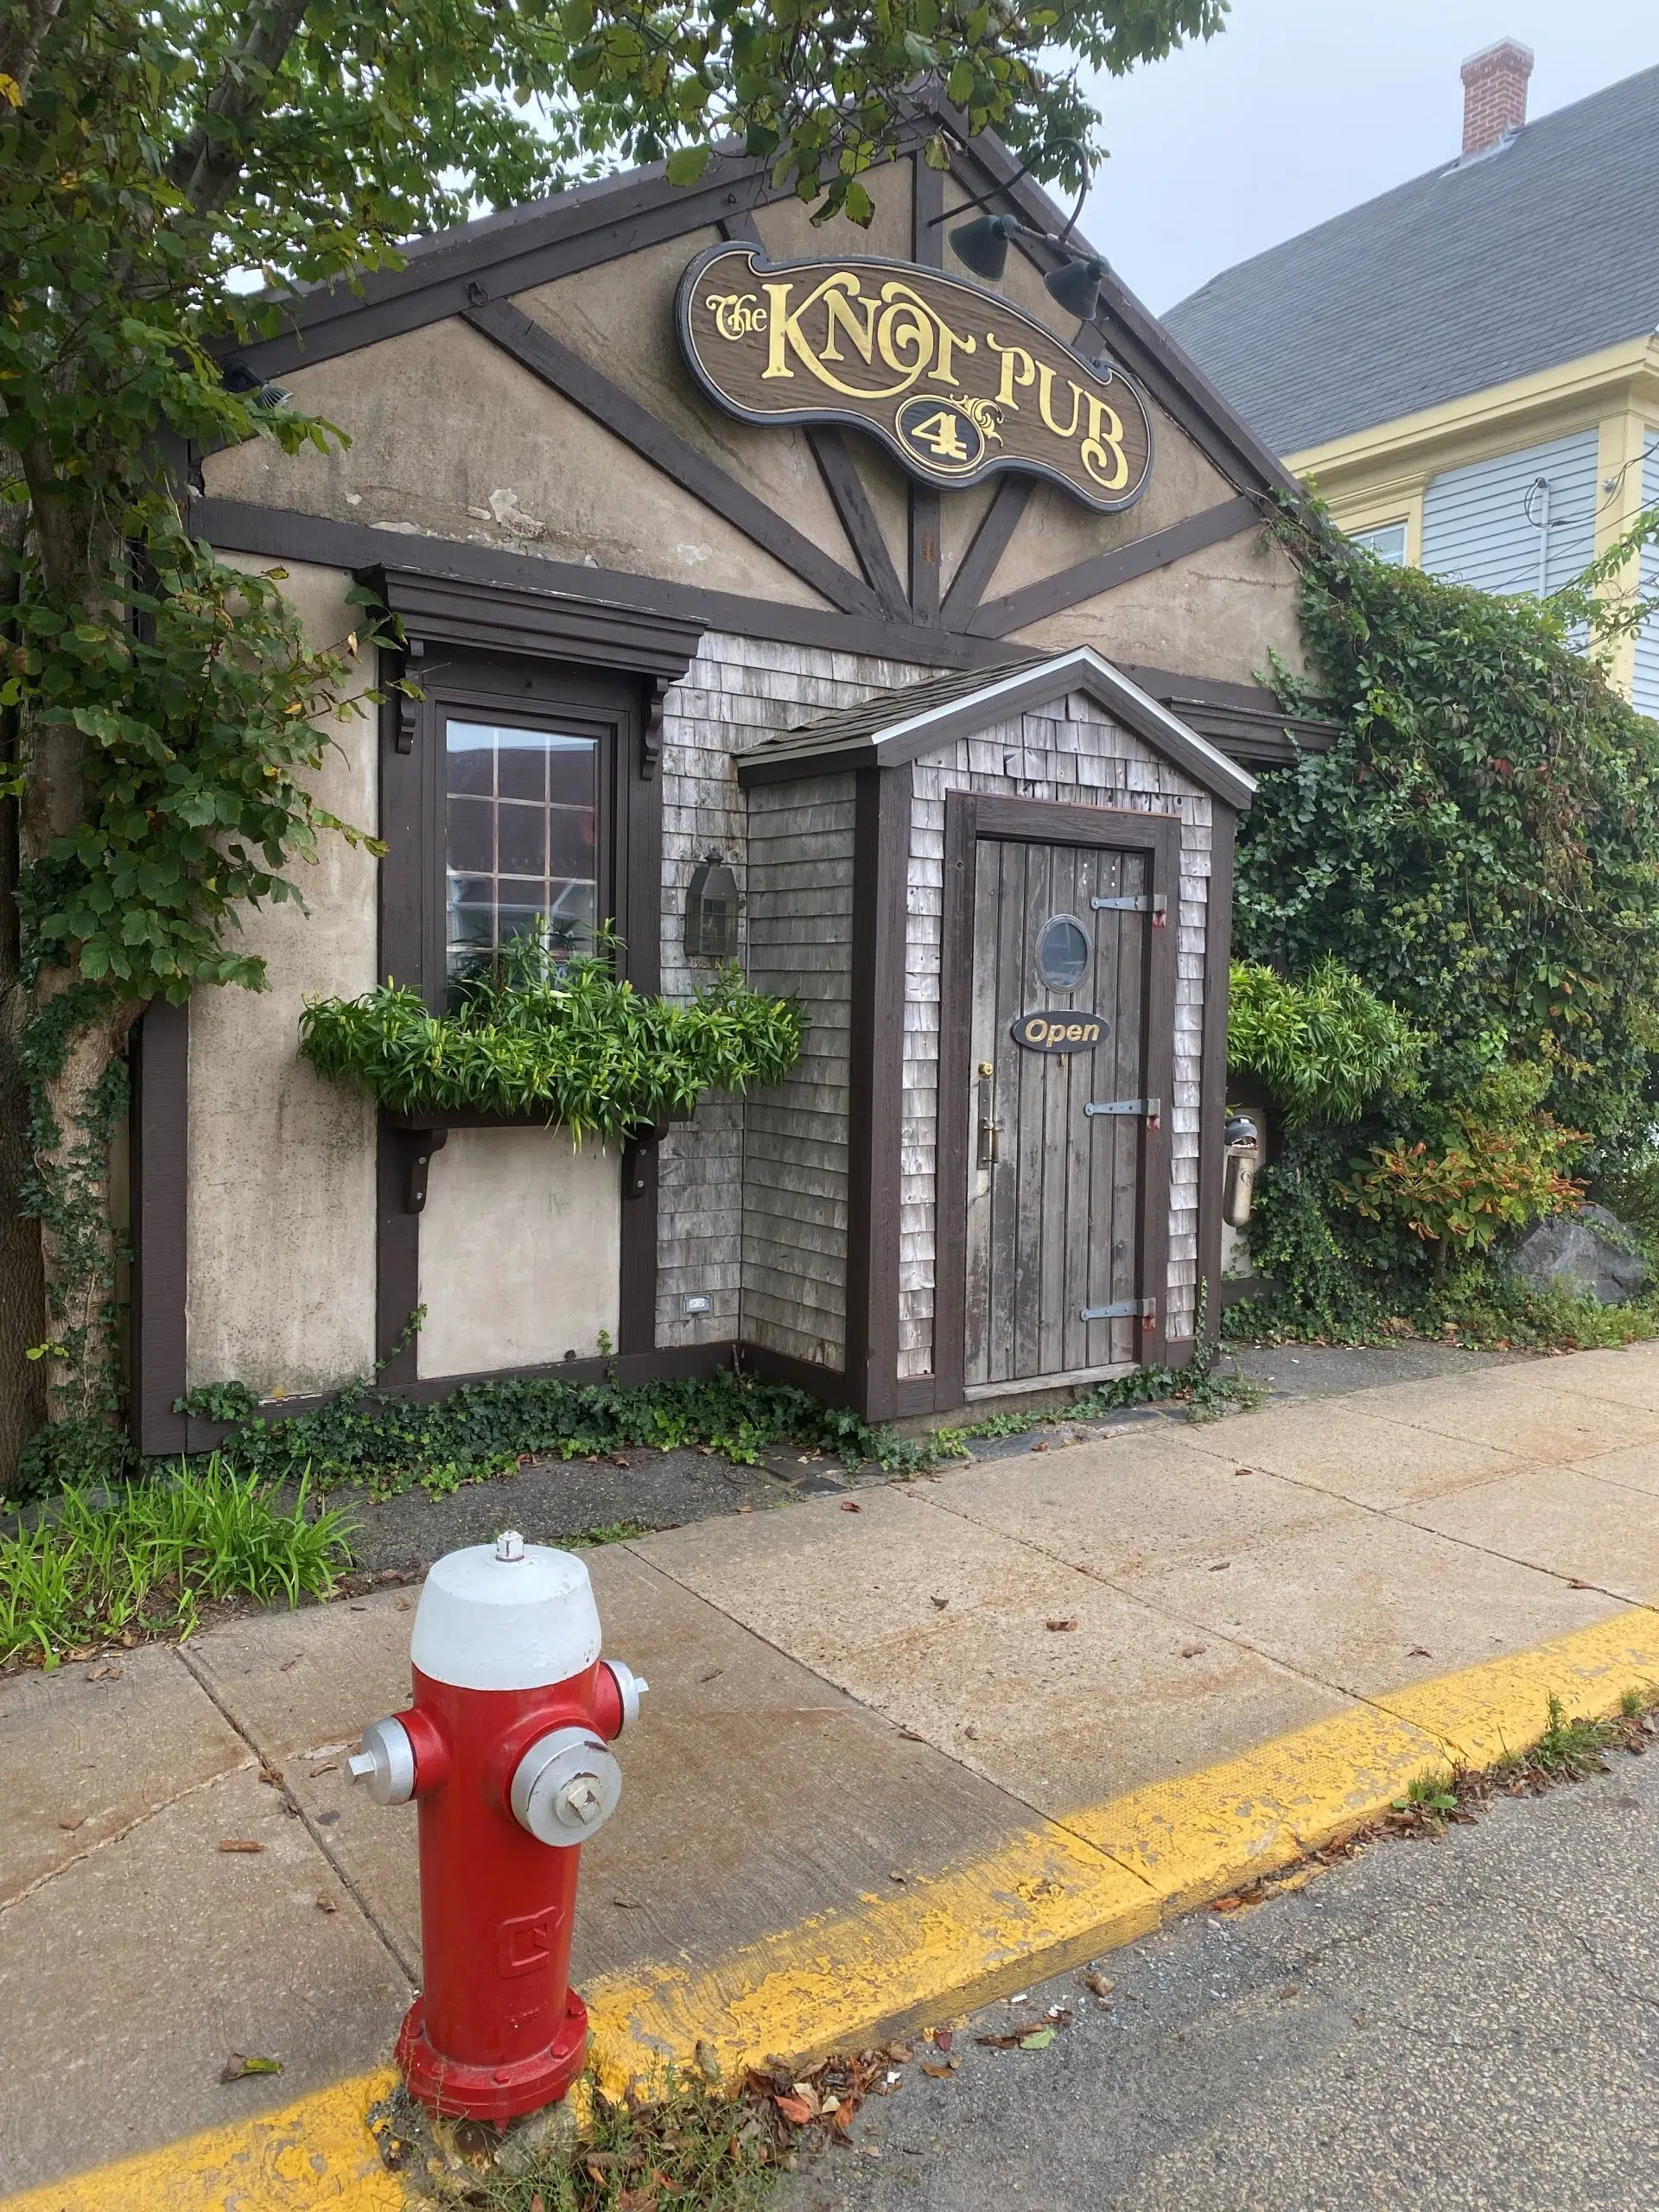 Knot Pub closes temporarily after small explosion